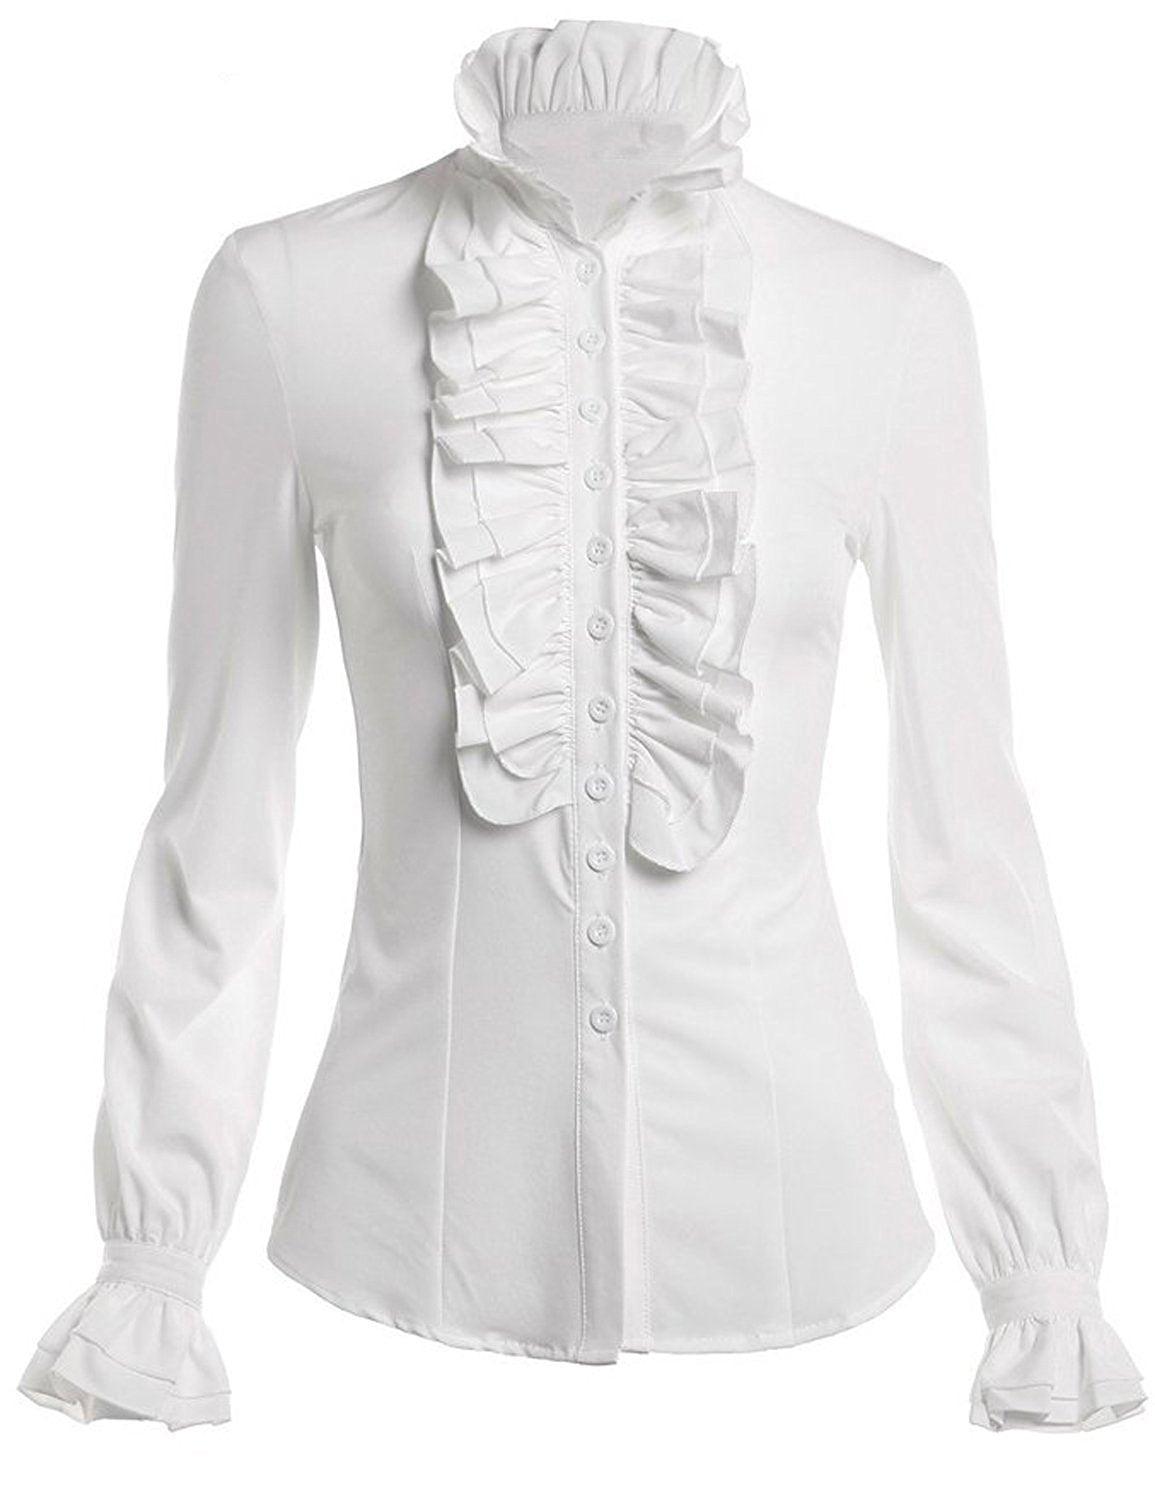 Stand-Up Ruffled Collar Buttoned Down Long Sleeves Shirt - MY SEXY STYLES